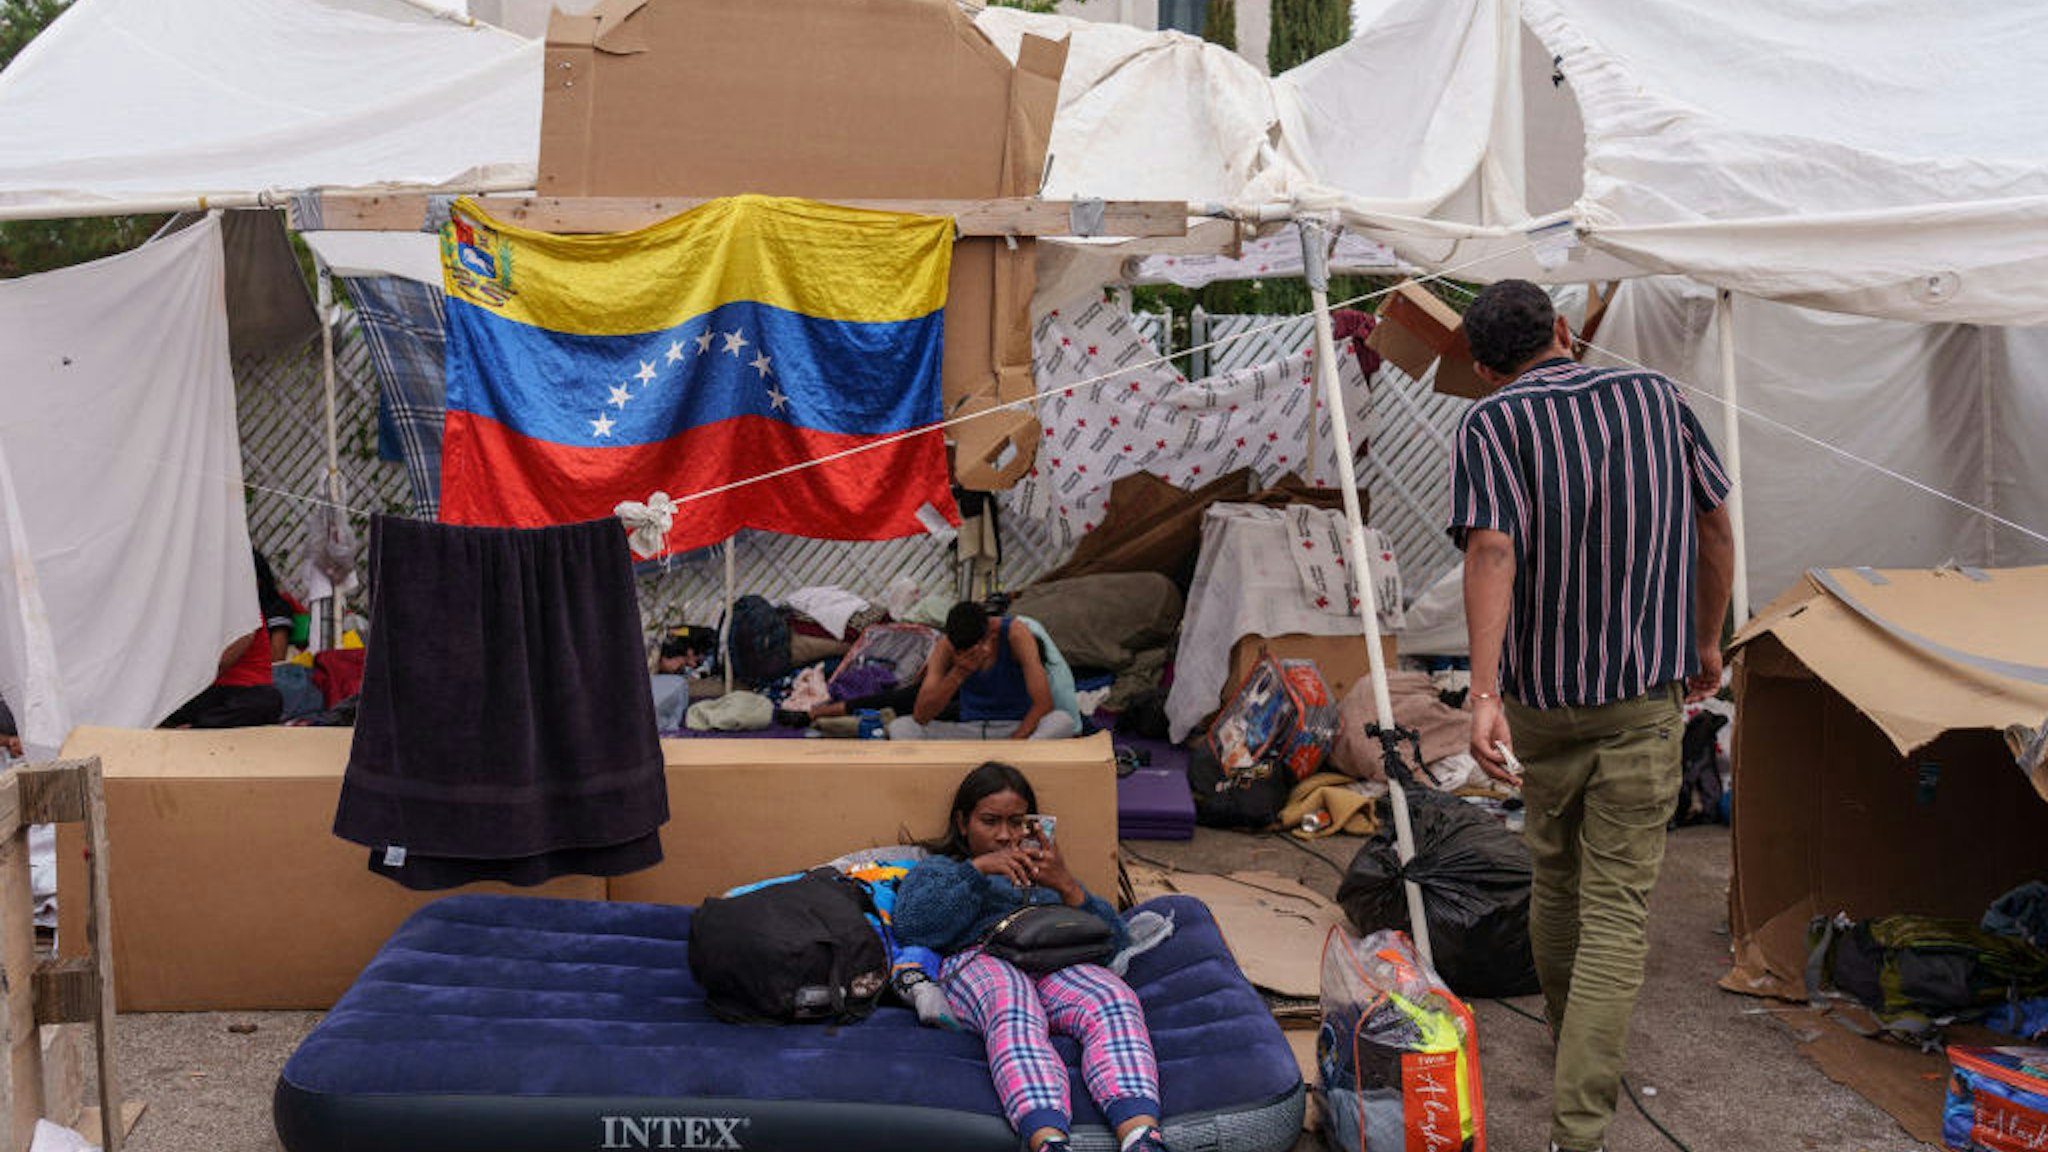 Migrants camped out in front of Opportunity Center for the Homeless before the lifting of Title 42 in El Paso, Texas, US, on Wednesday, May 3, 2023. Photographer: Paul Ratje/Bloomberg